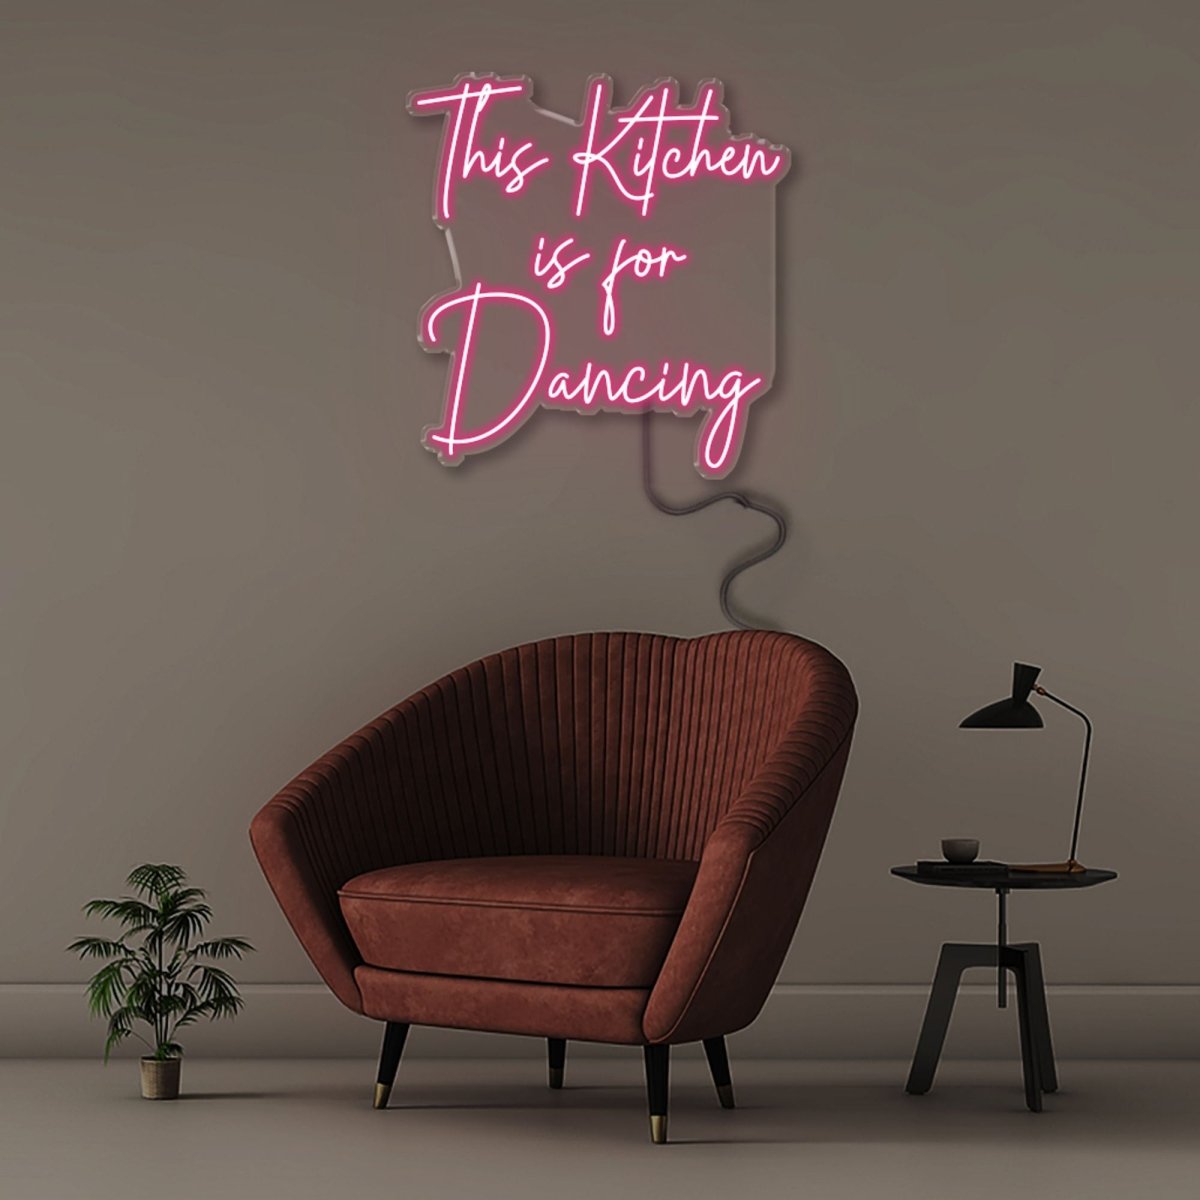 This Kitchen Is For Dancing - Neonific - LED Neon Signs - 61cm (24") -